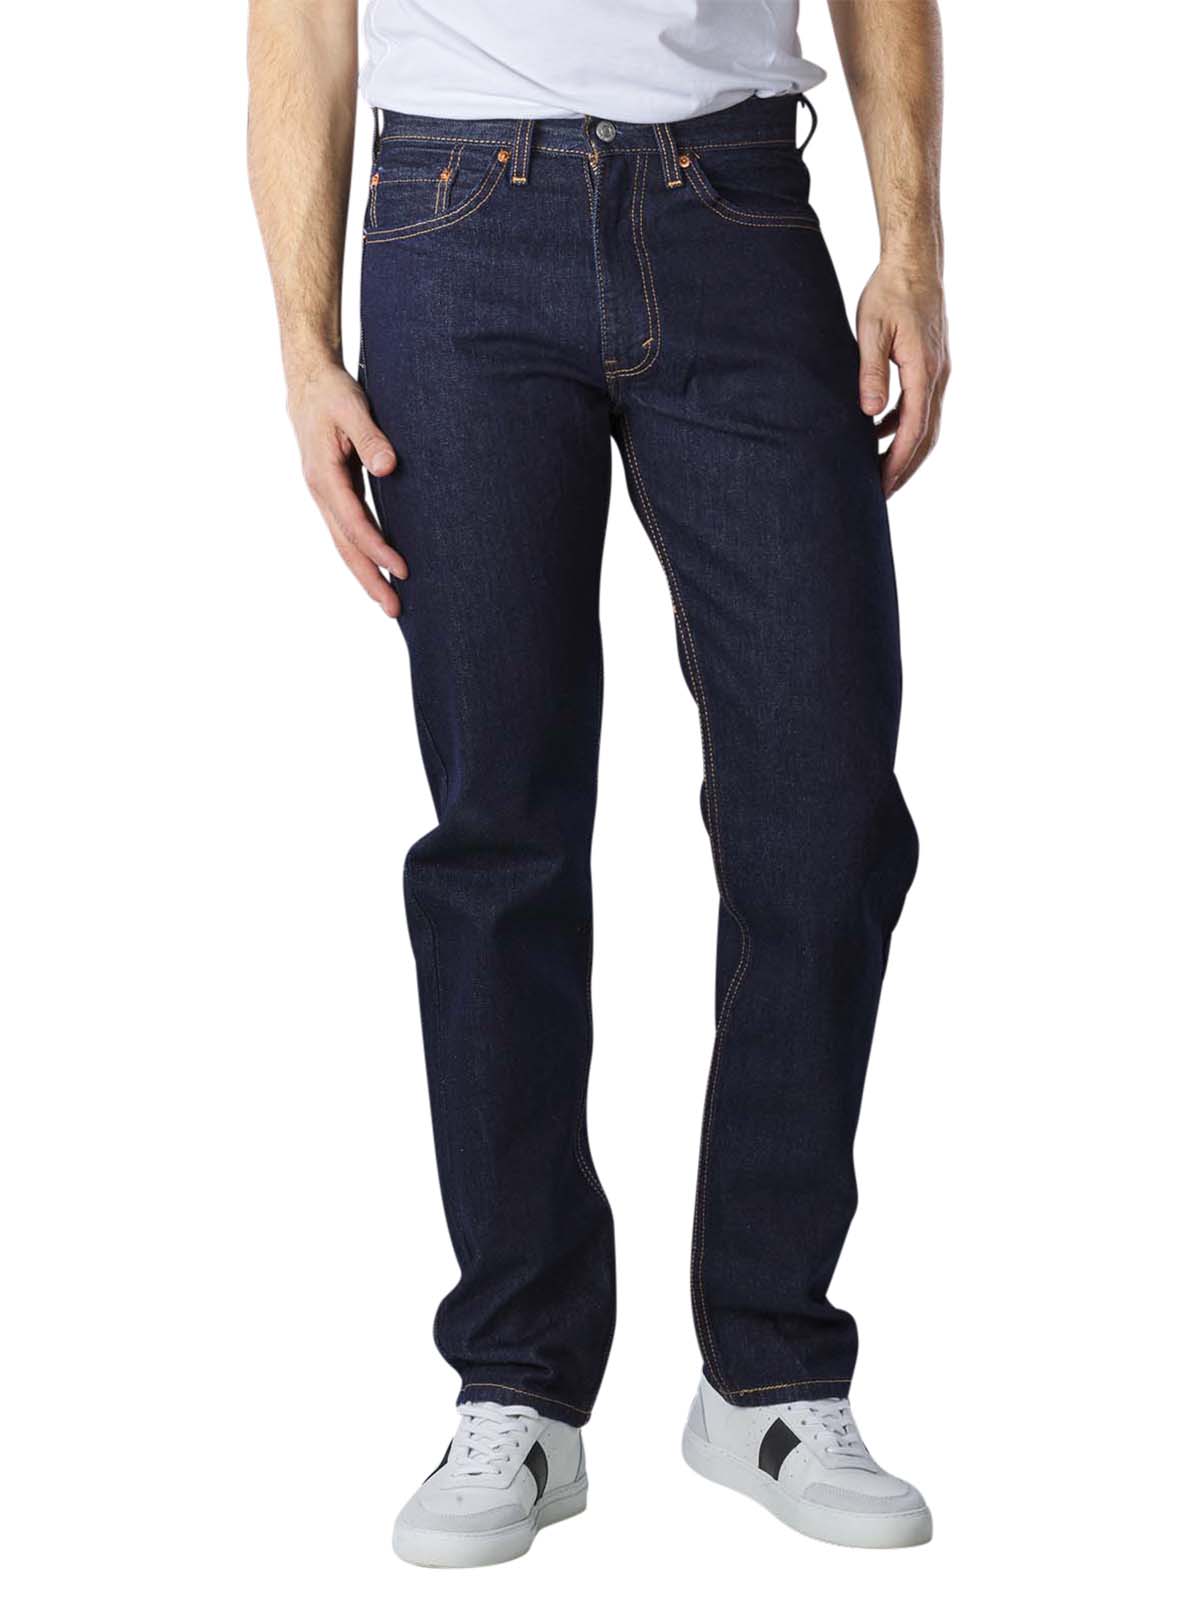 Levi's 505 Jeans rinse (zip) Levi's Men's Jeans | Free Shipping on   - SIMPLY LOOK GOOD